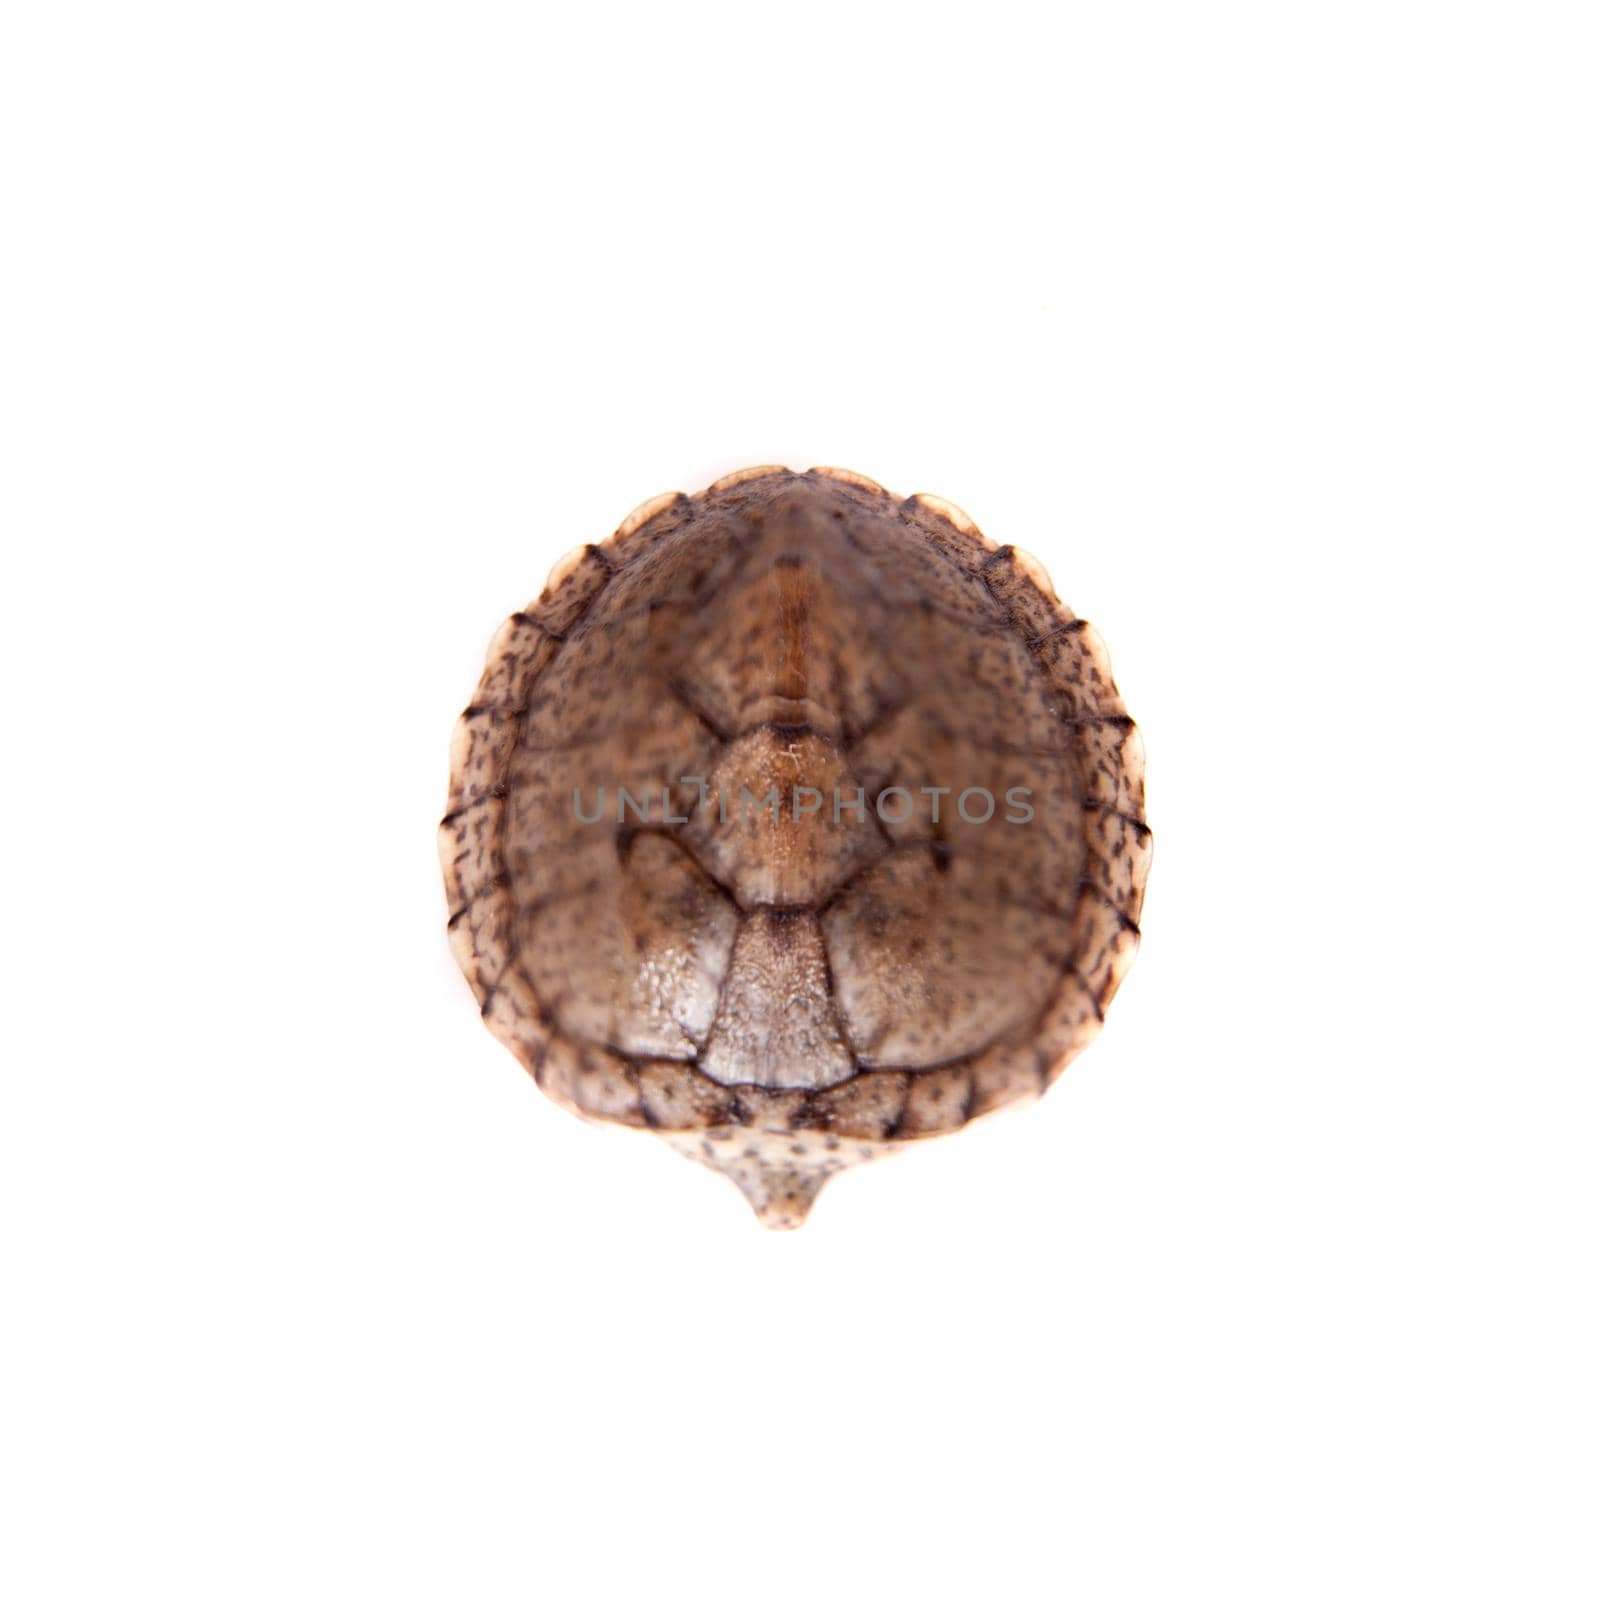 The African keeled mud turtle on white by RosaJay